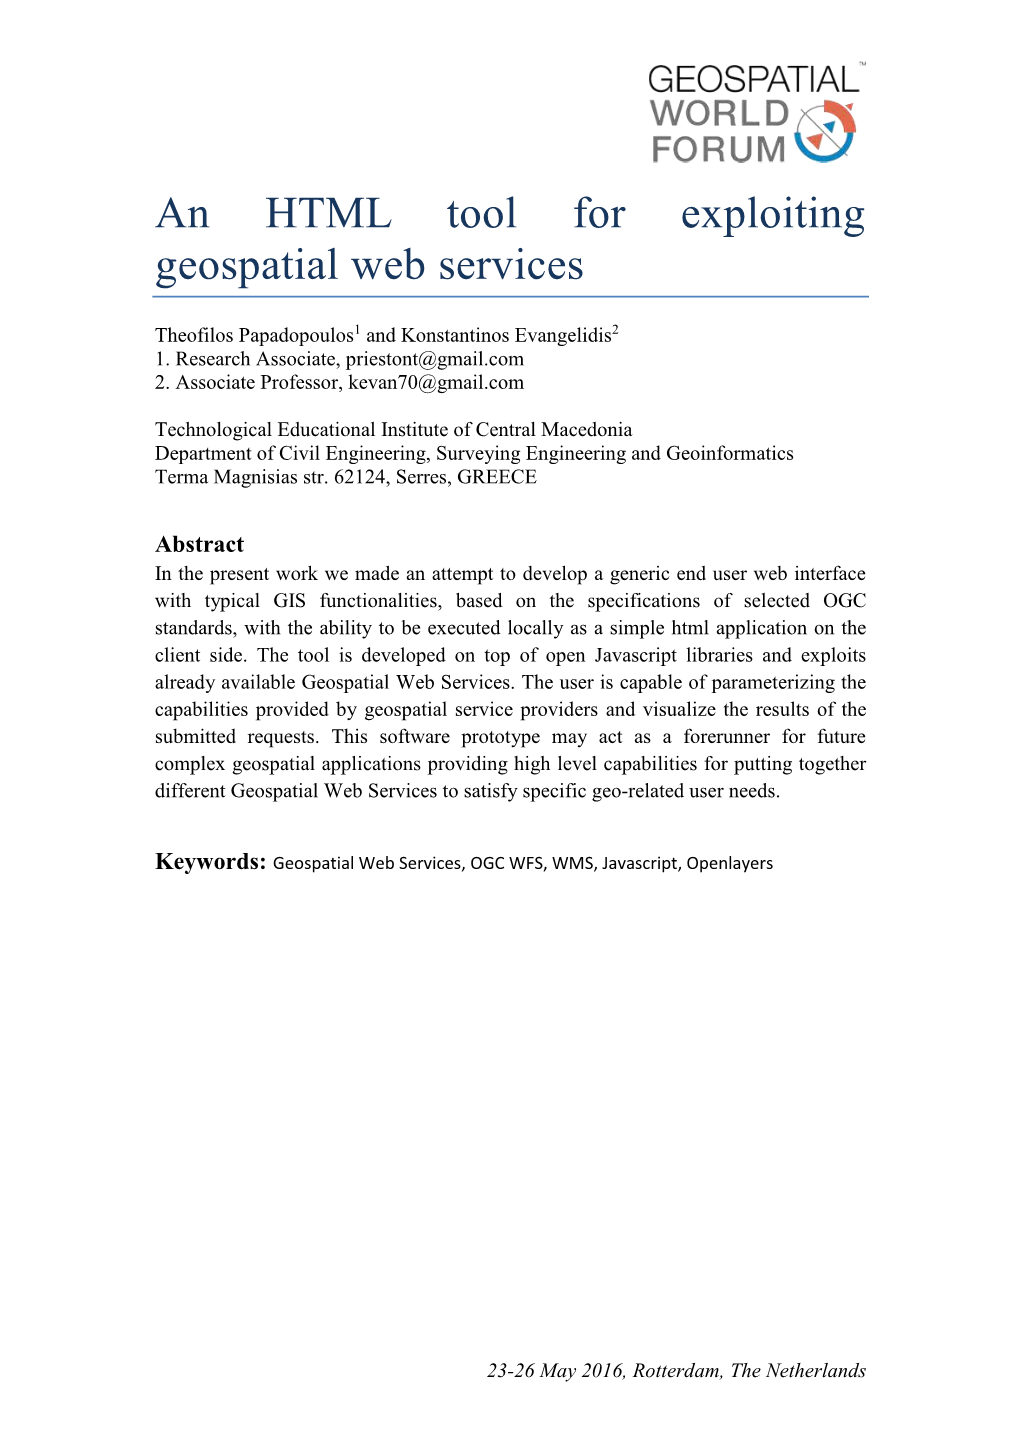 An HTML Tool for Exploiting Geospatial Web Services